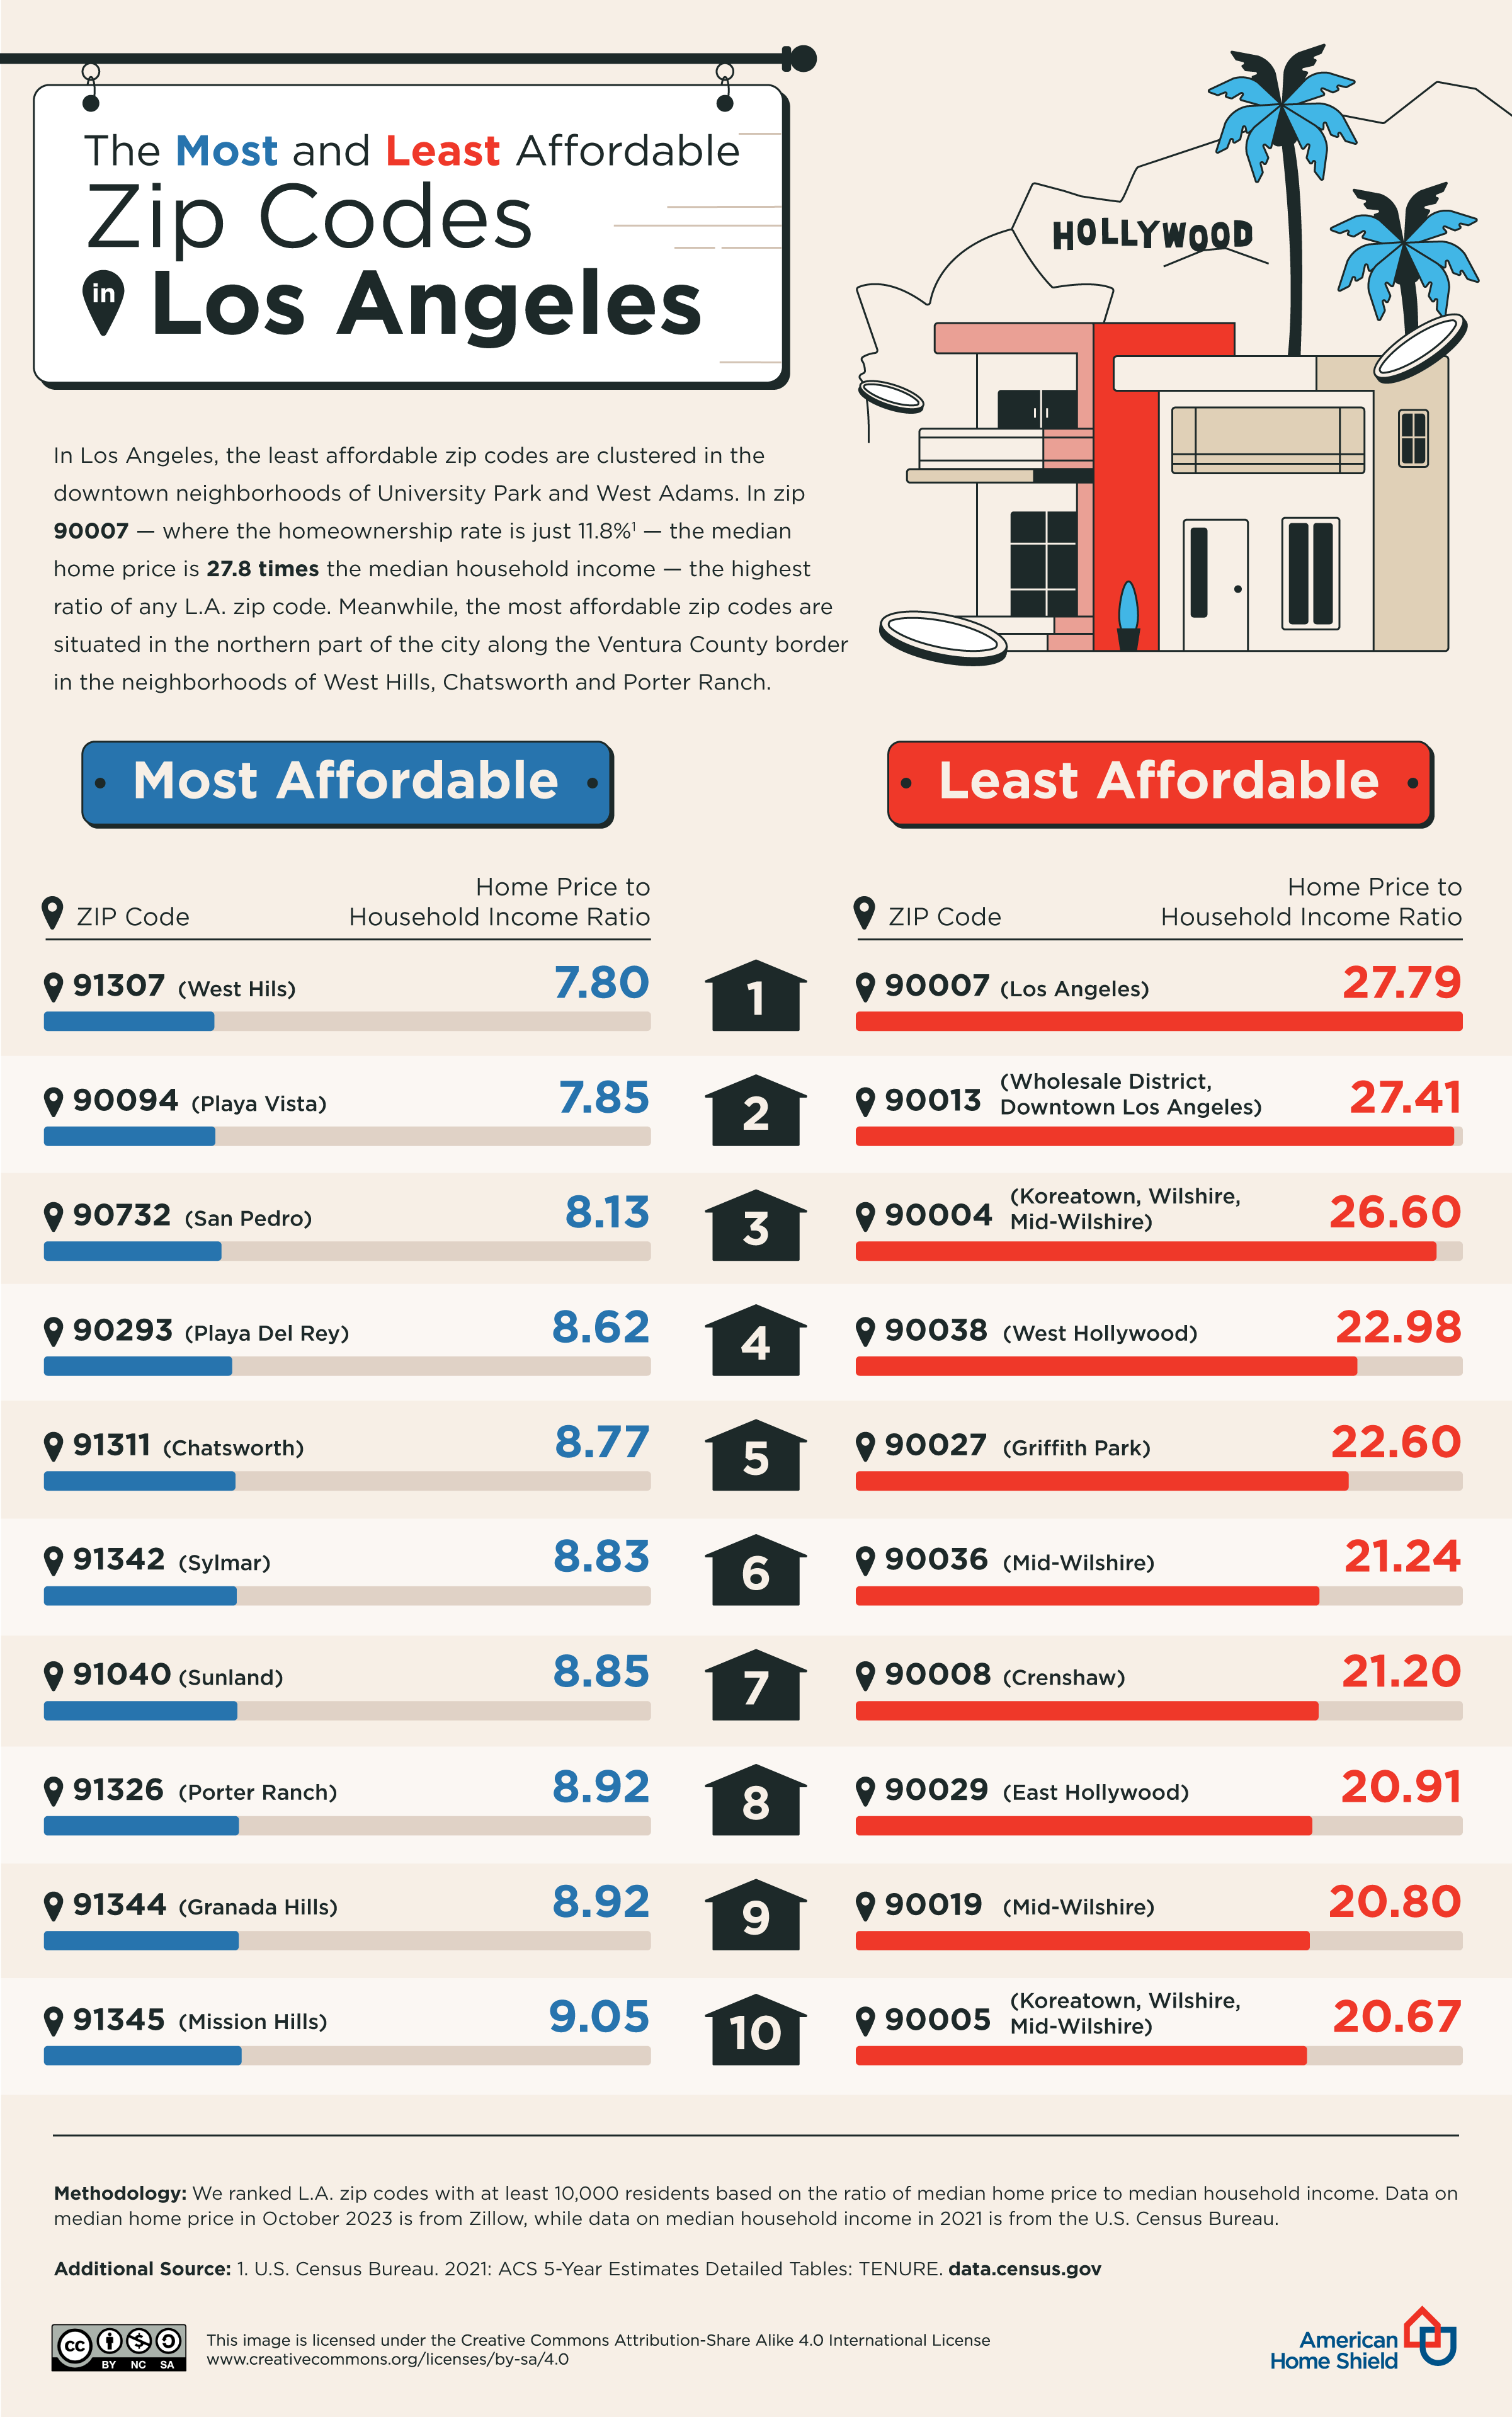 List of the most and least affordable zip codes in Los Angeles